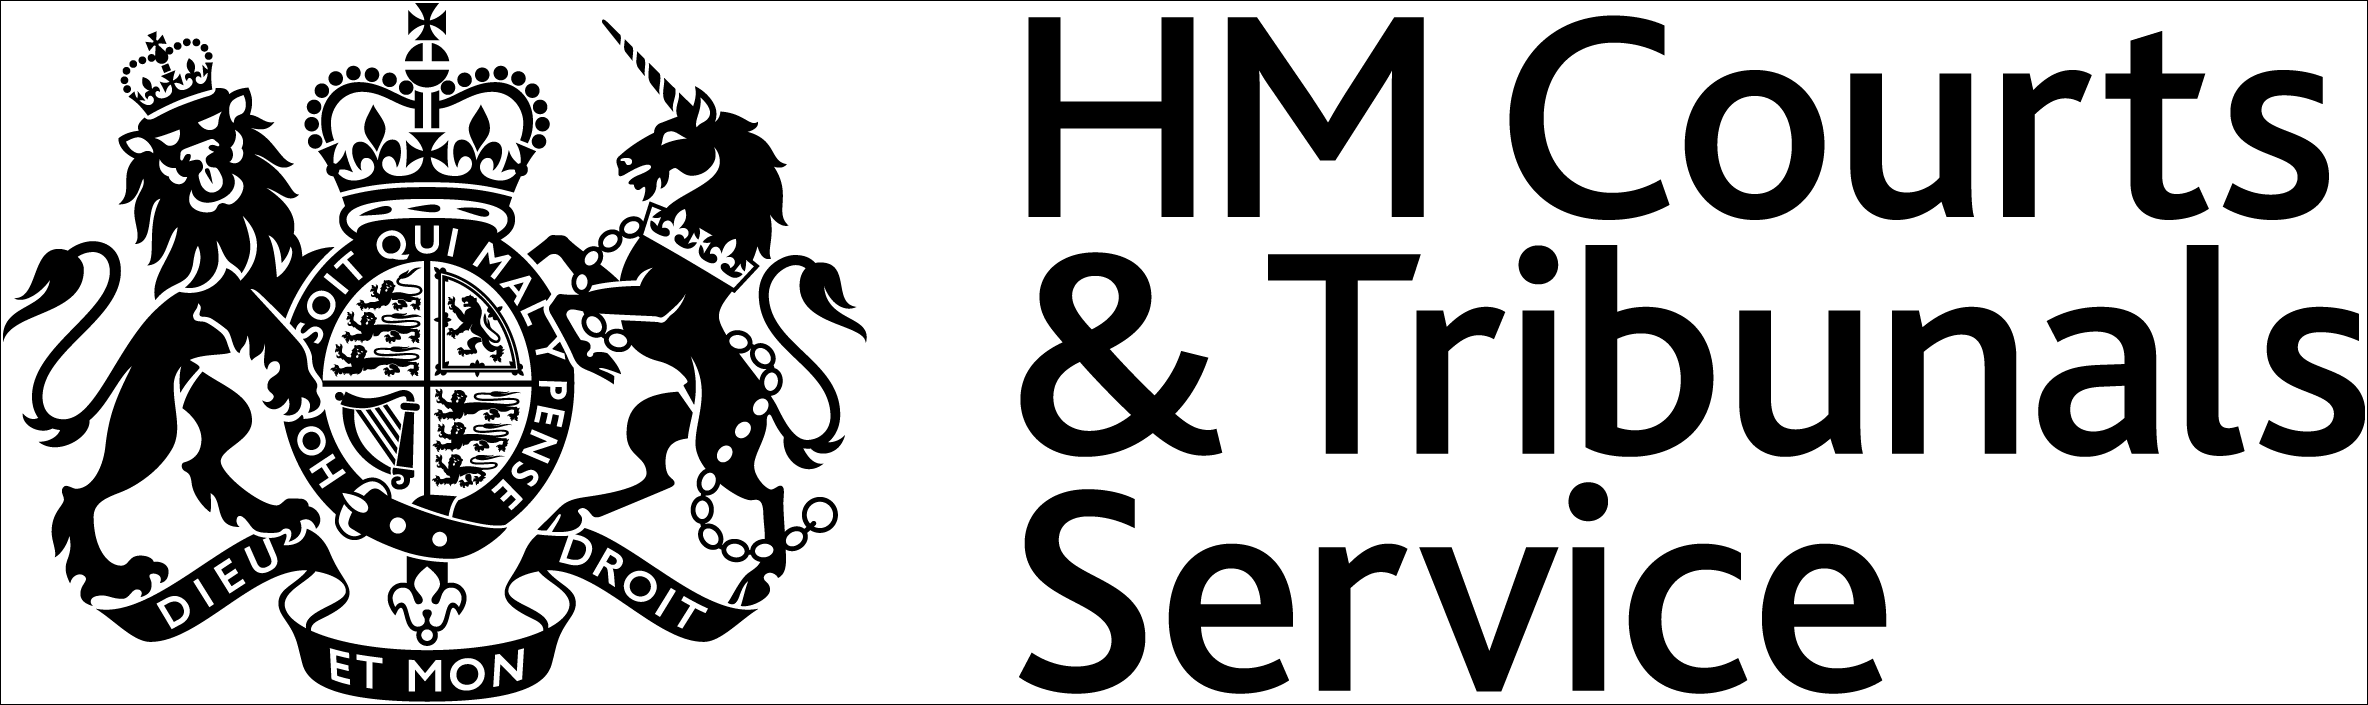 HMCTS